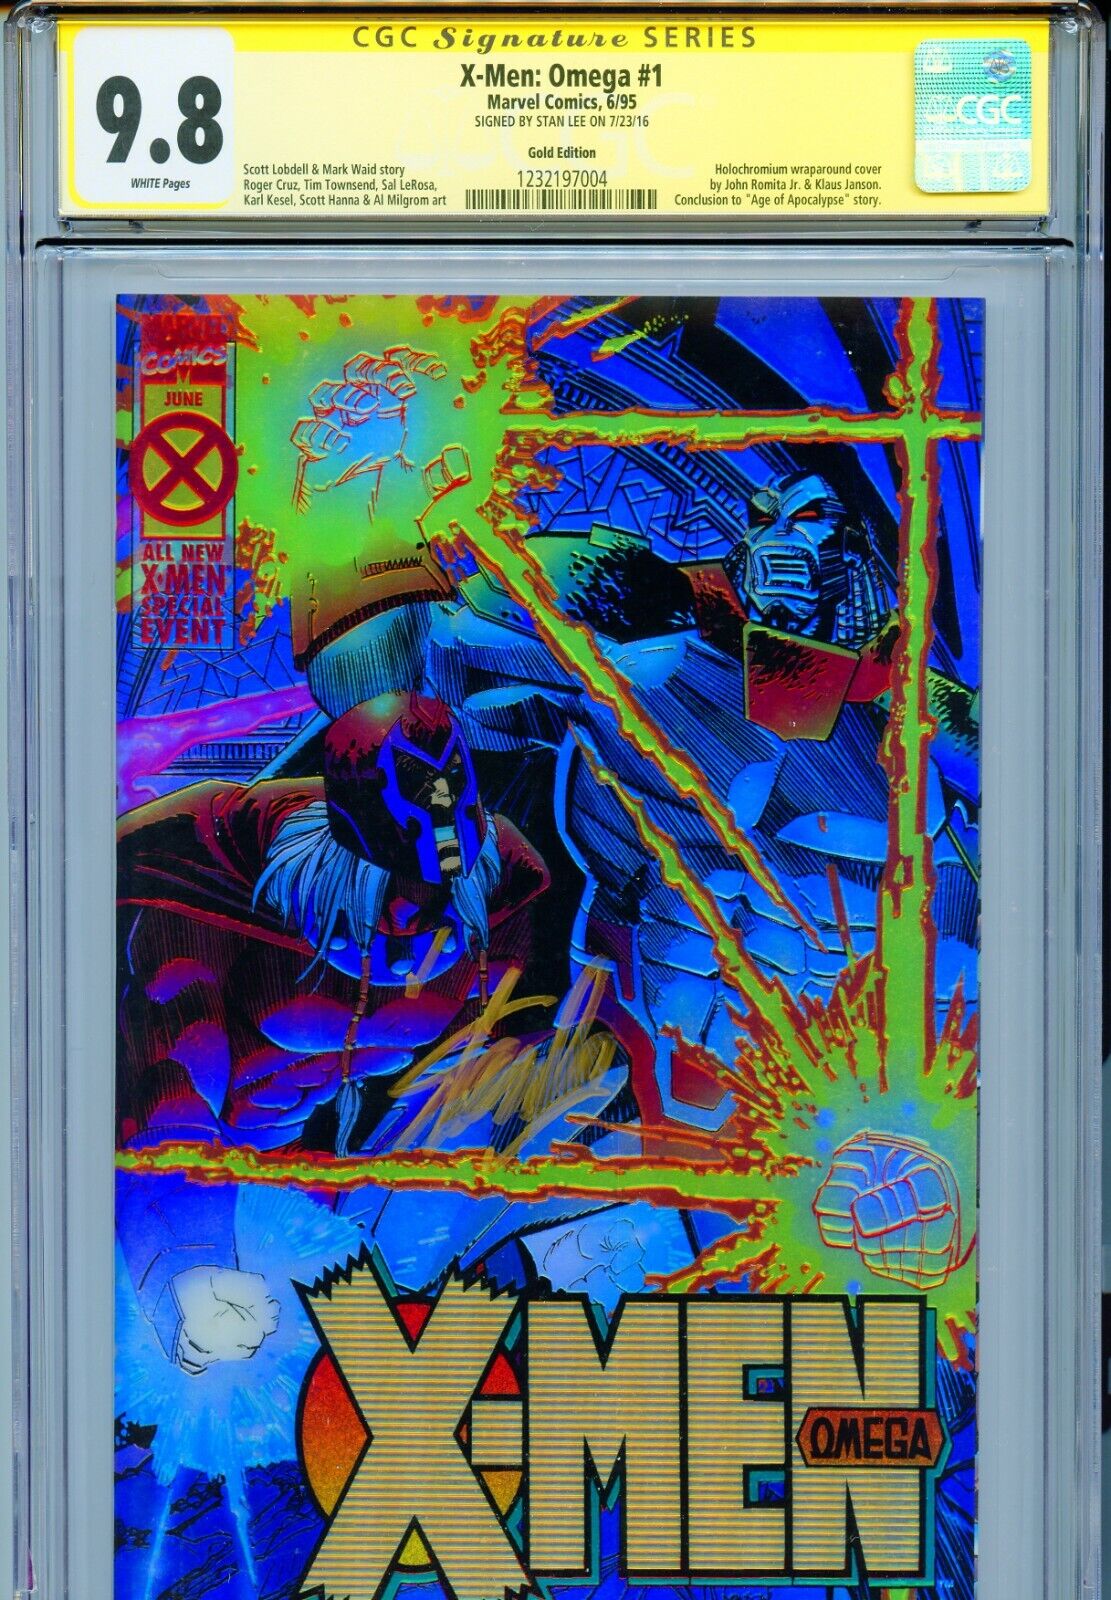  X-Men Omega 1 CGC 9.8 SS Gold cover Stan Lee Age of Apocalypse Weapon X Rogue